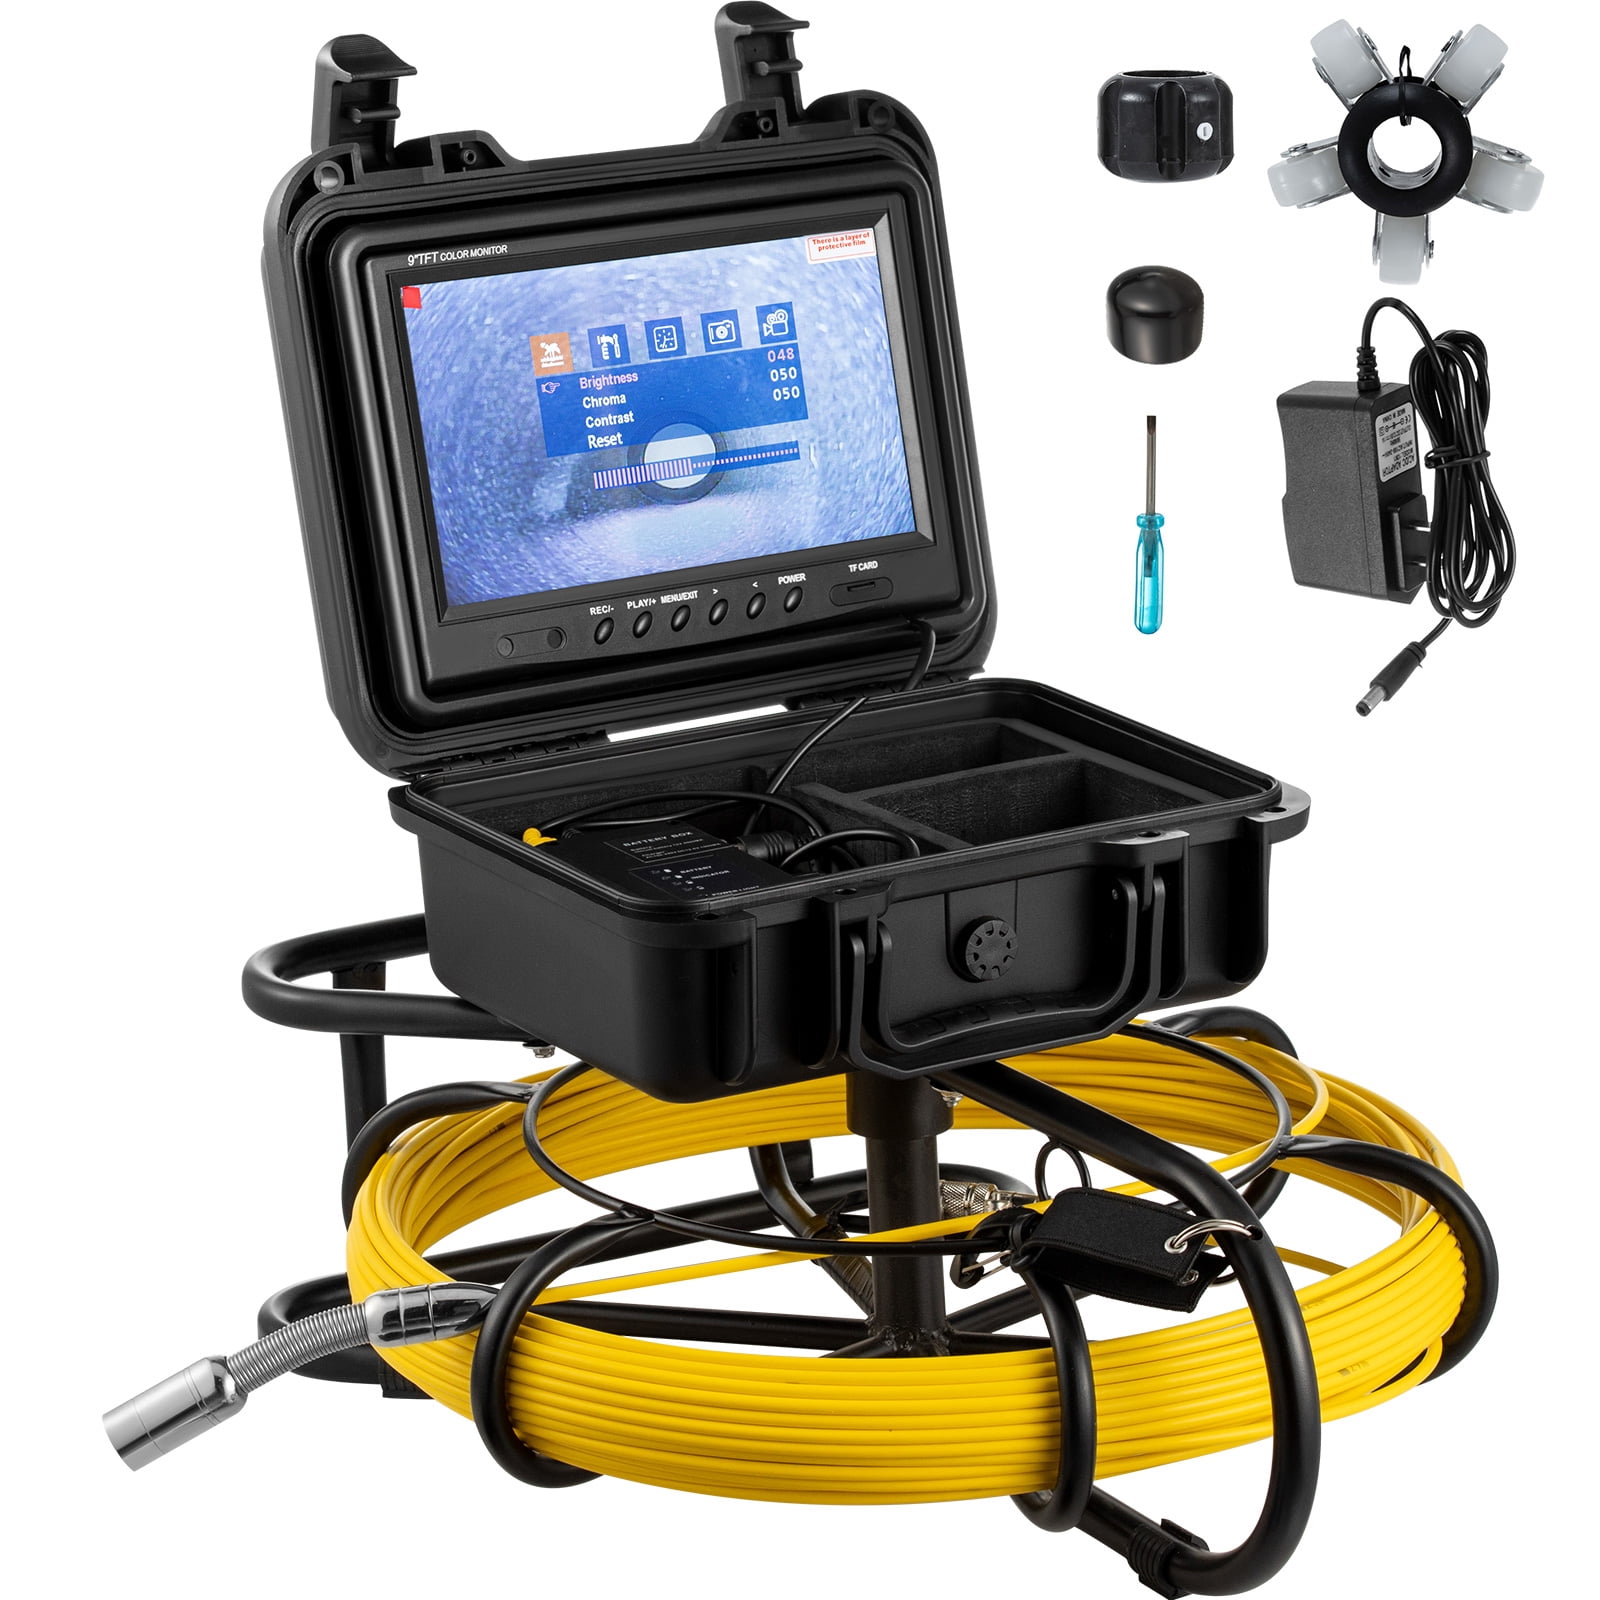 Underwater Fishing Camera Viewing System Colour £89.99 to Clear 20 meters 